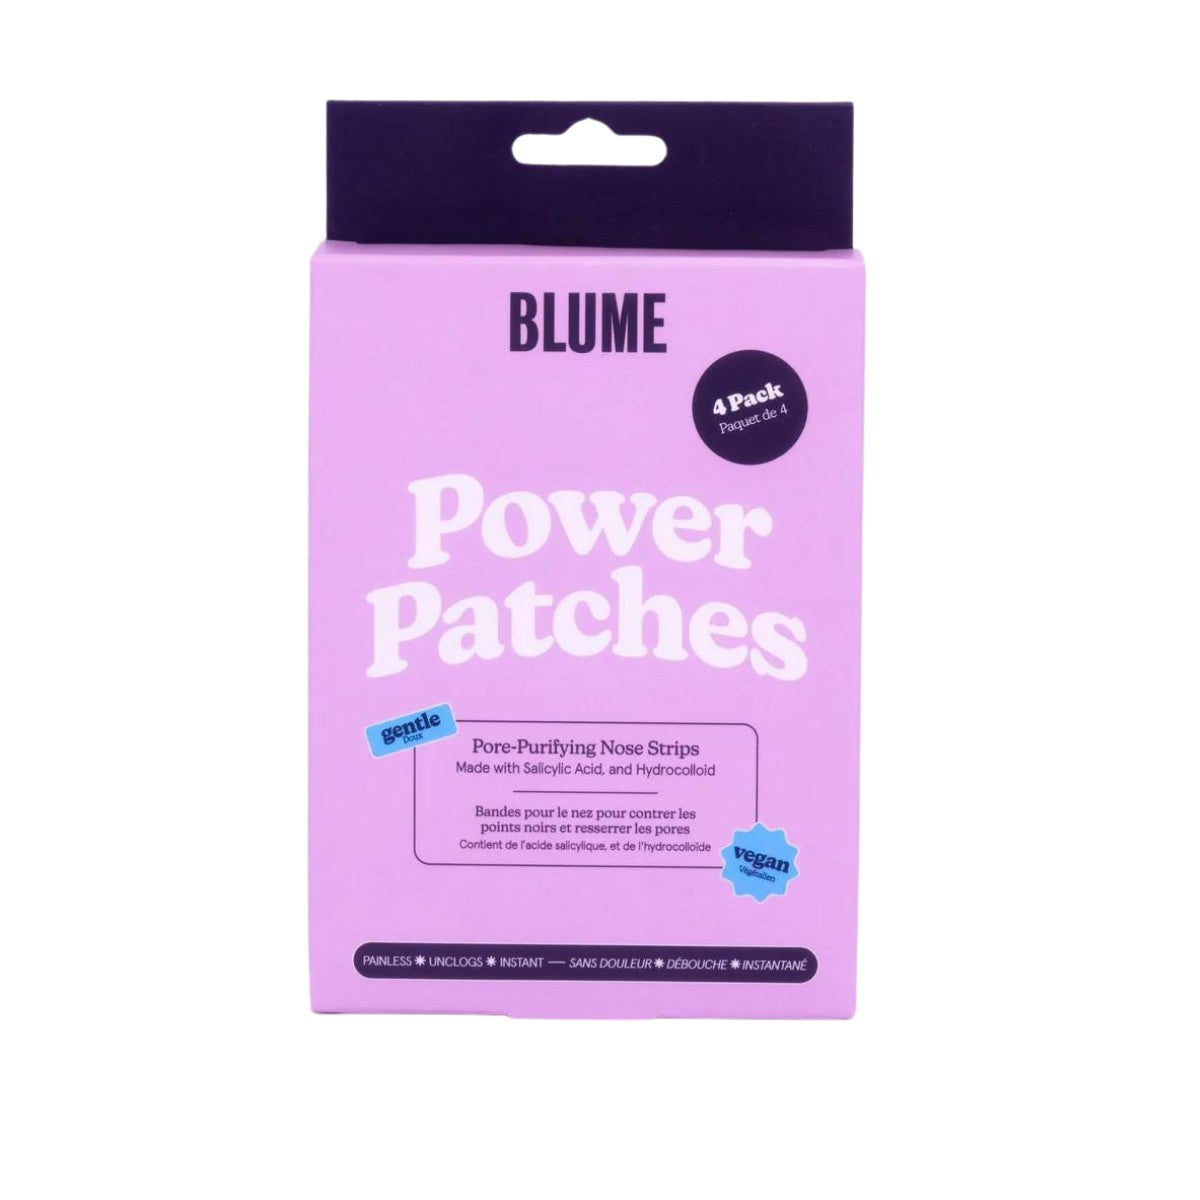 Blume Power Patches Pore Purifying Nose Strips